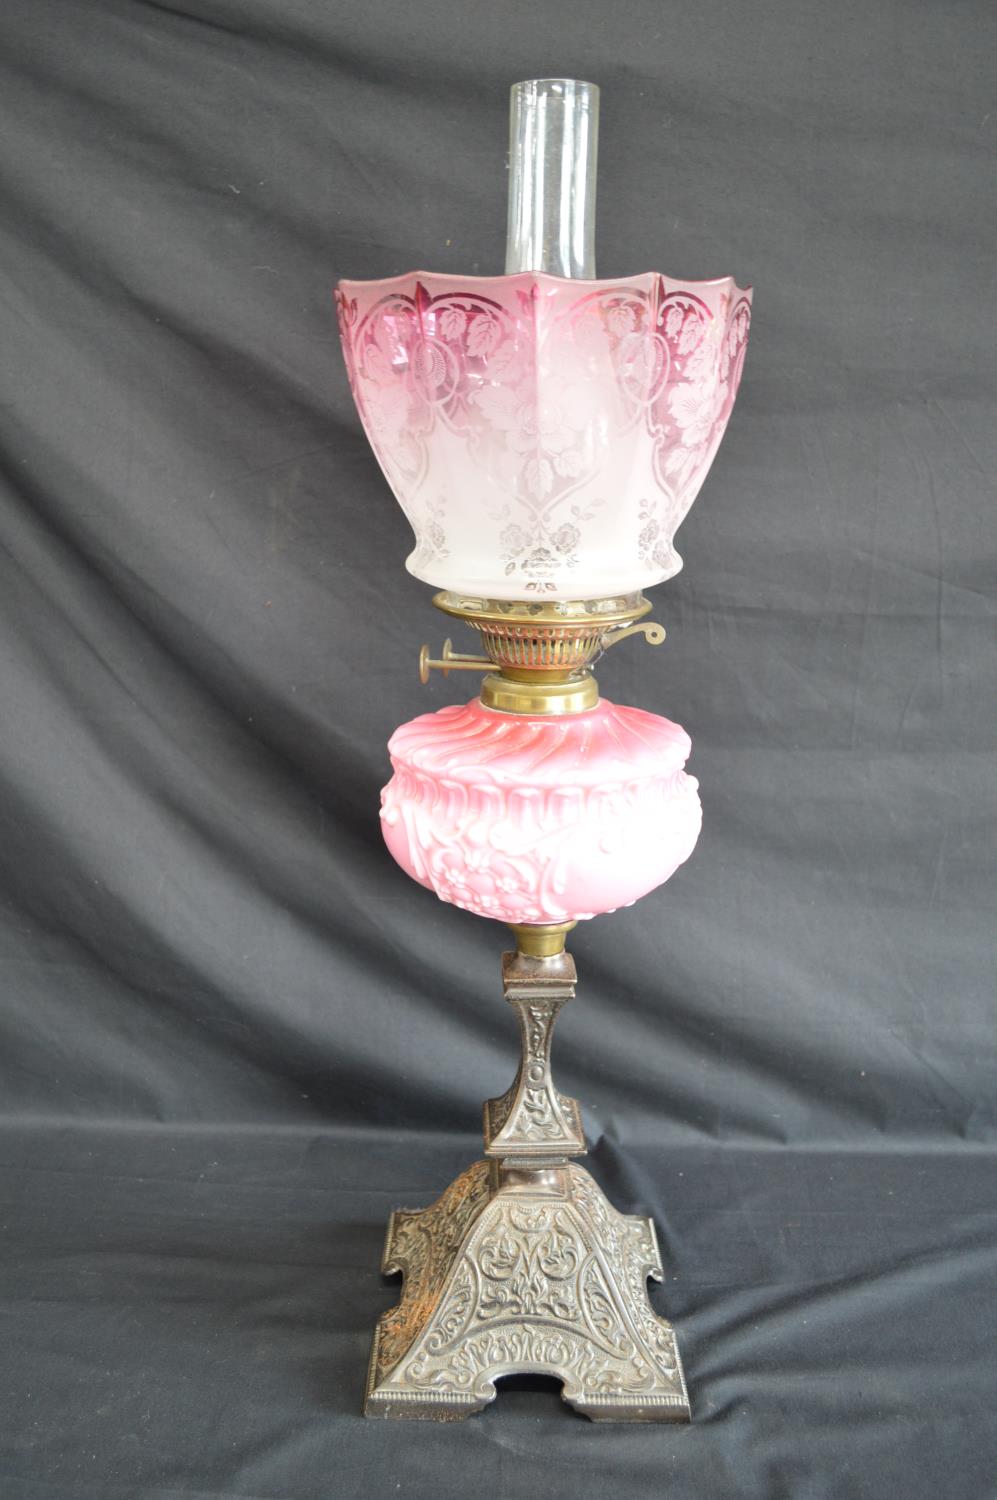 Victorian iron based oil lamp with pink glass reservoir and Cranberry glass shade - 69cm tall